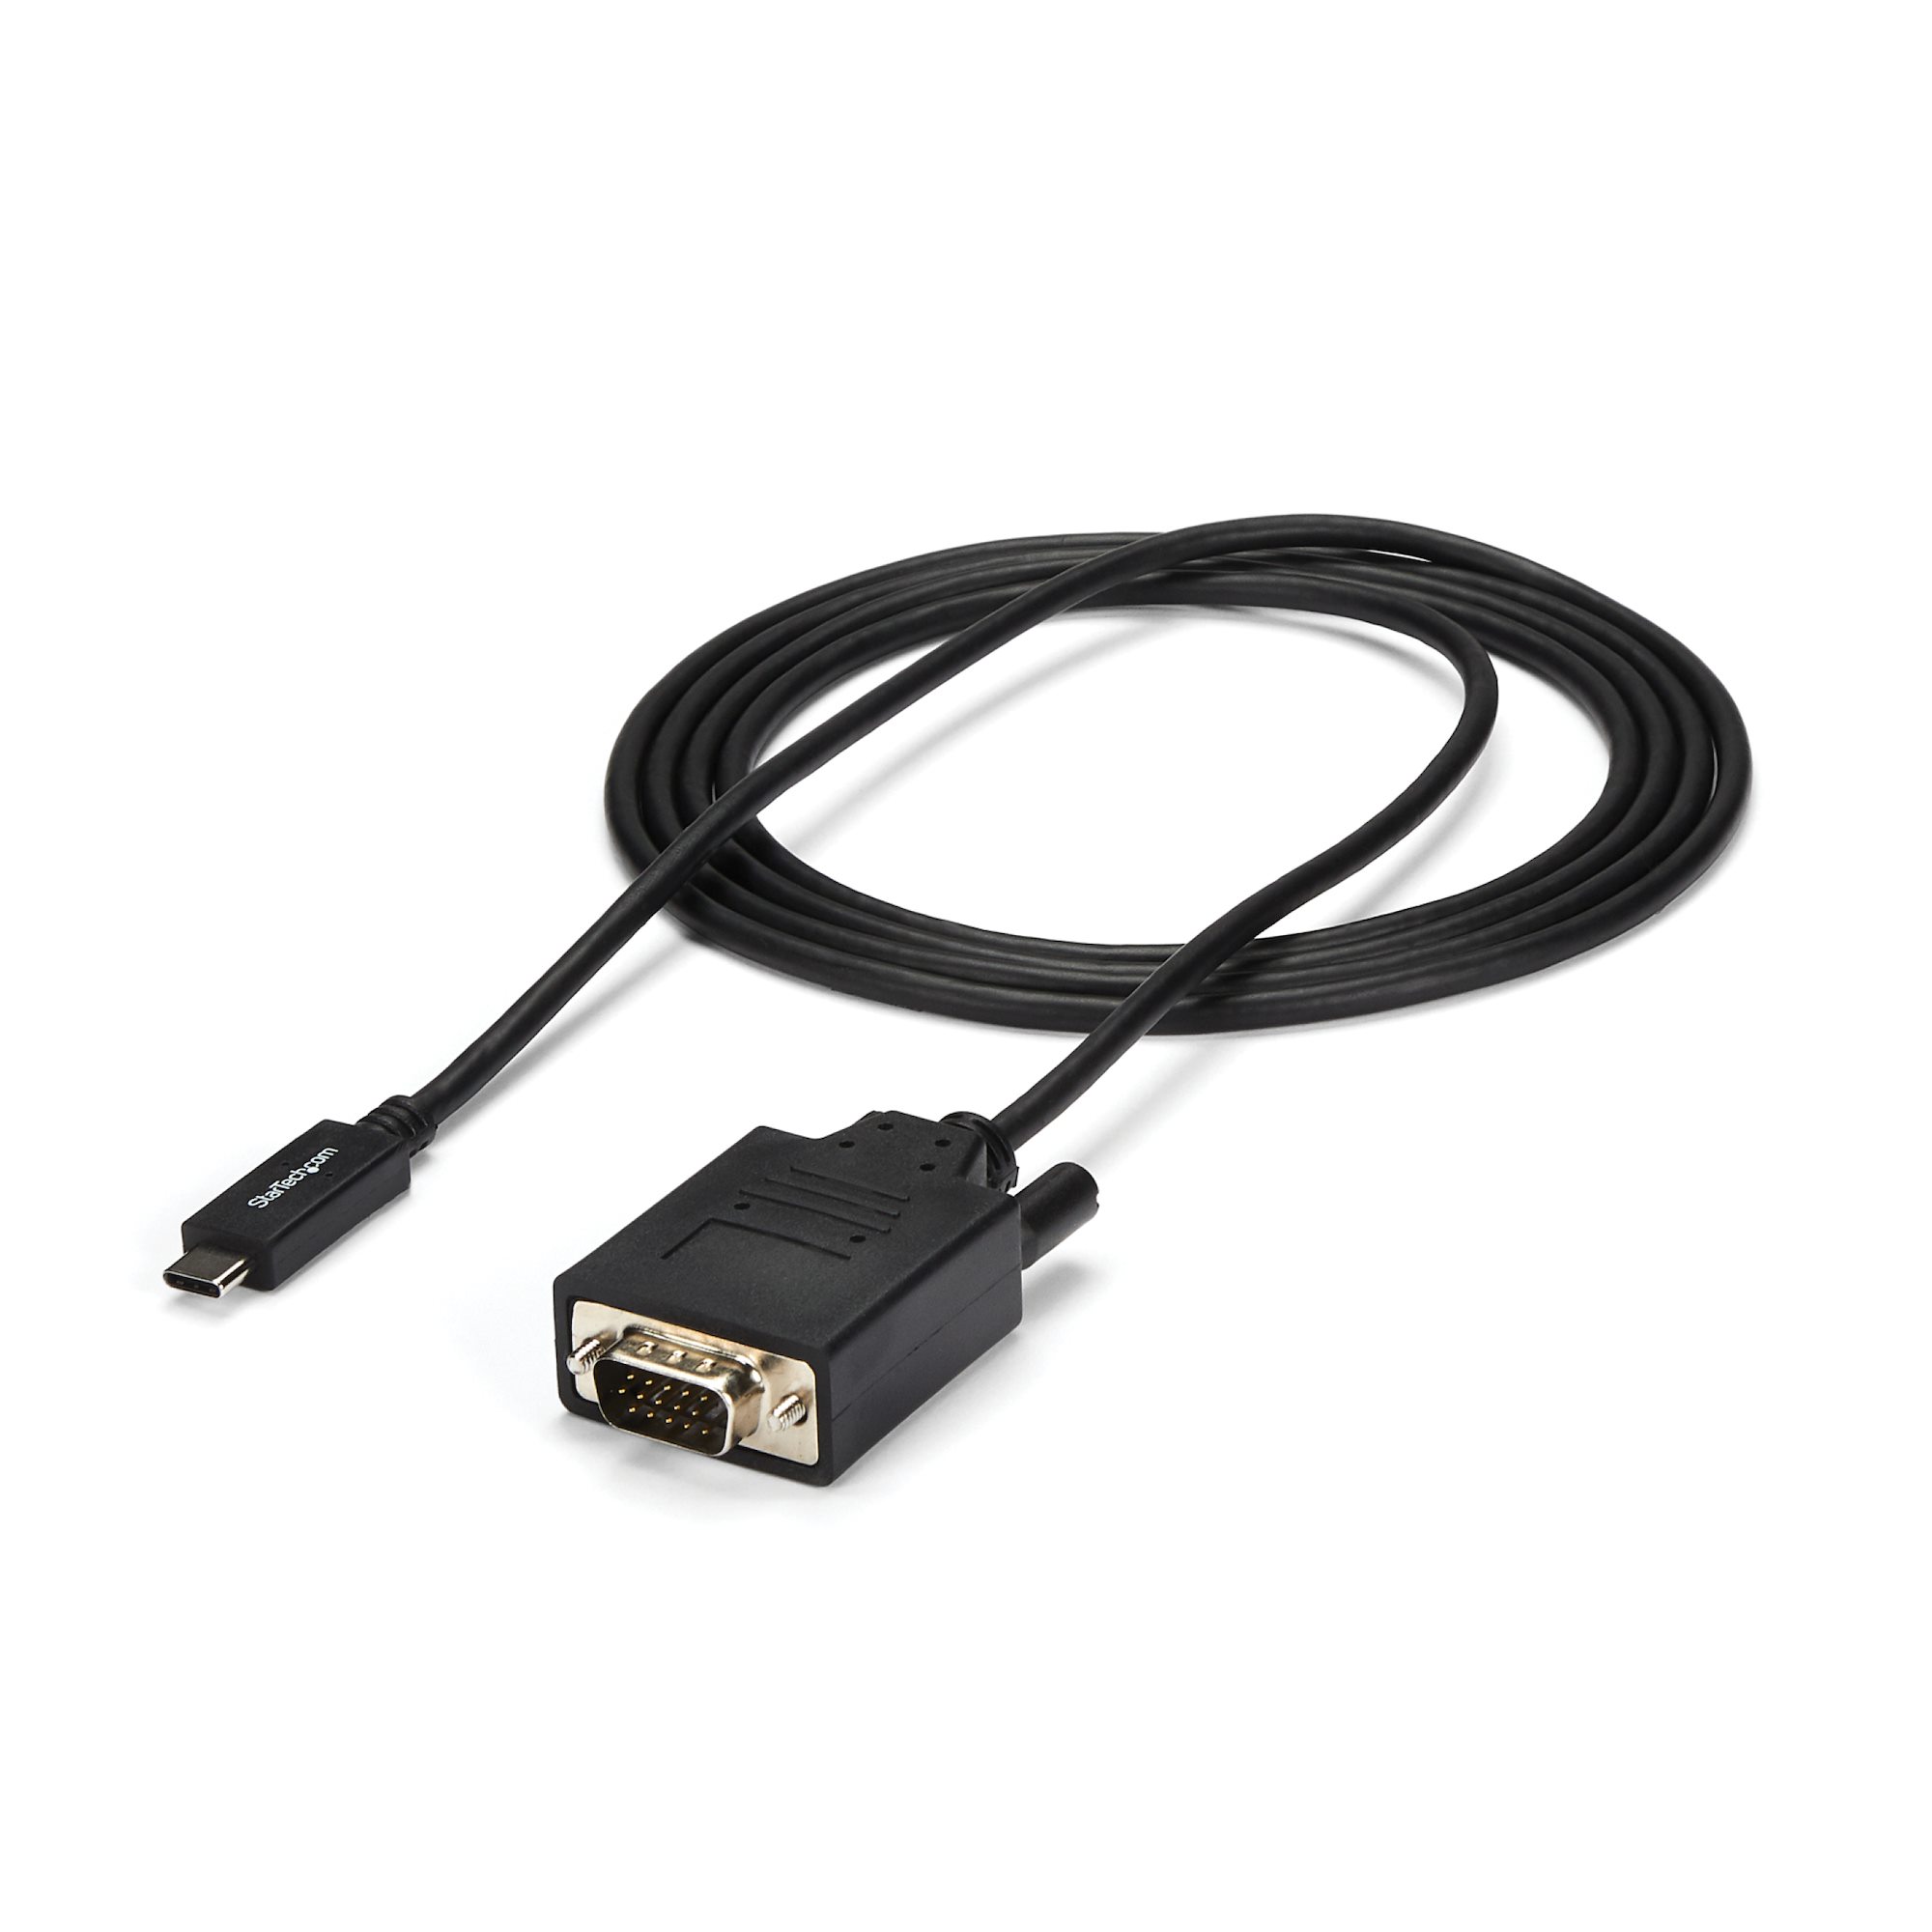 Styrke at klemme Tårer 6ft USB C to VGA Cable Video Adapter - USB-C Display Adapters | StarTech.com